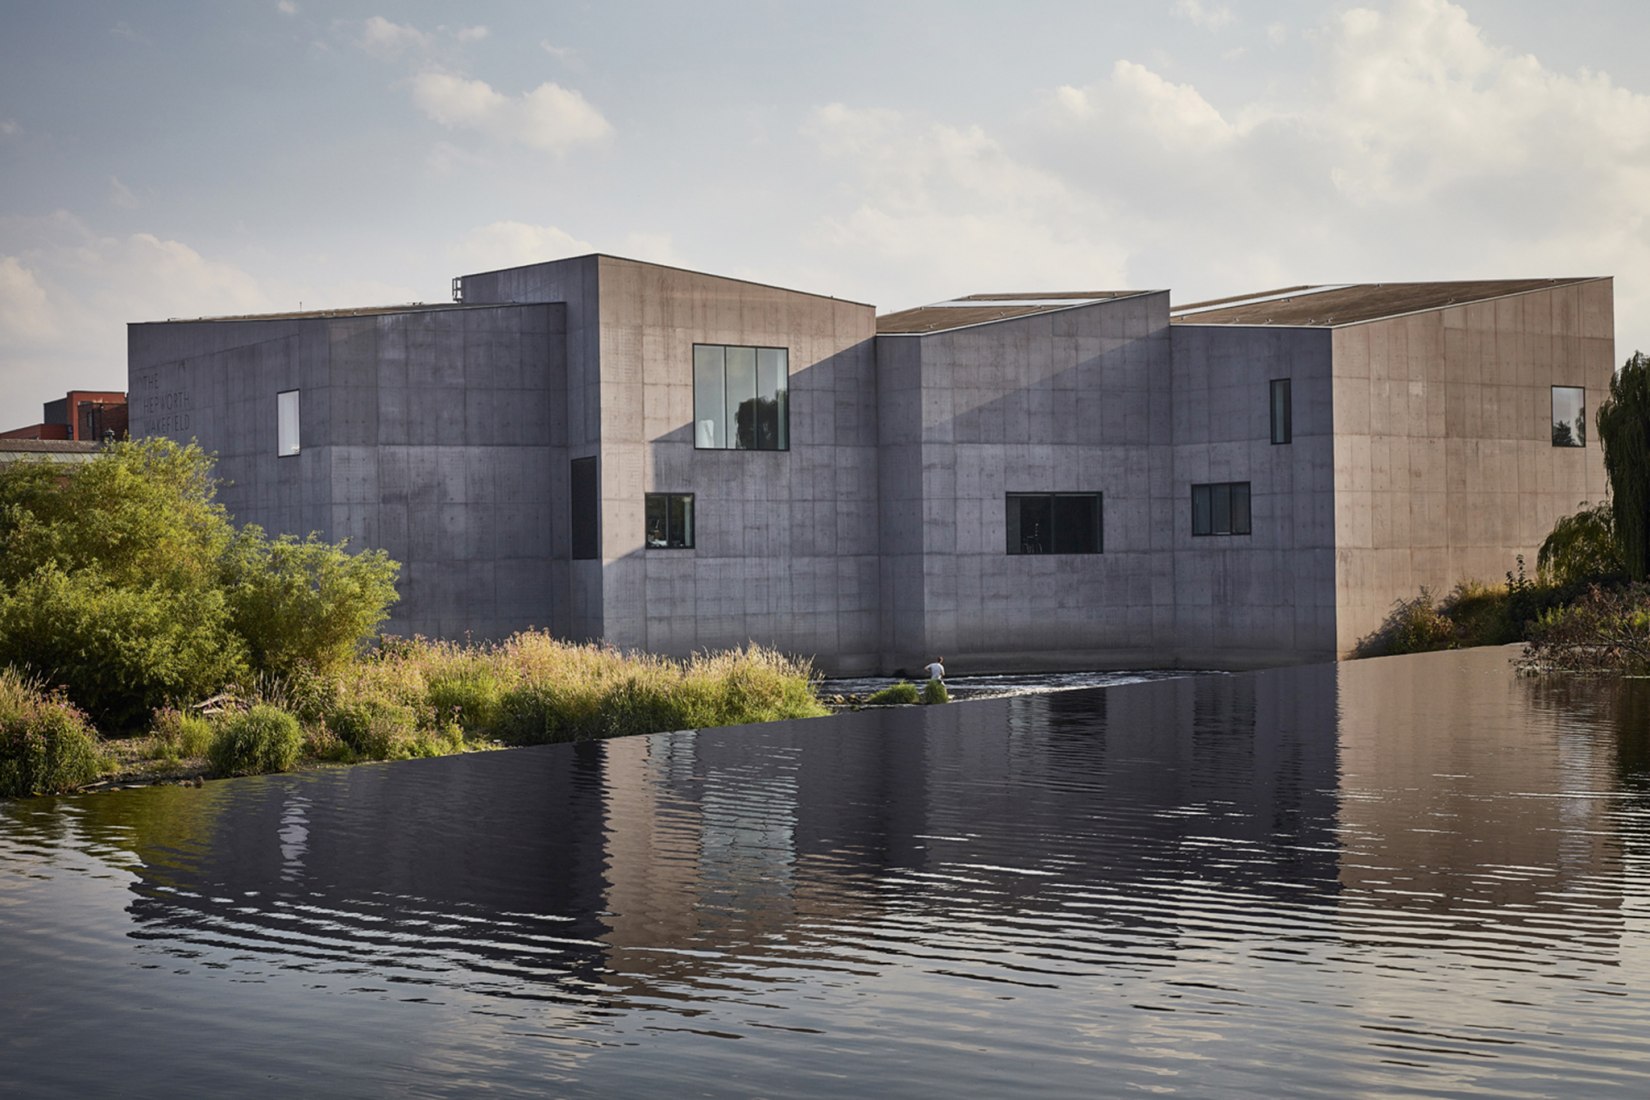 The Hepworth Wakefield By David Chipperfield Britains Museum Of The Year 2017 The Strength 